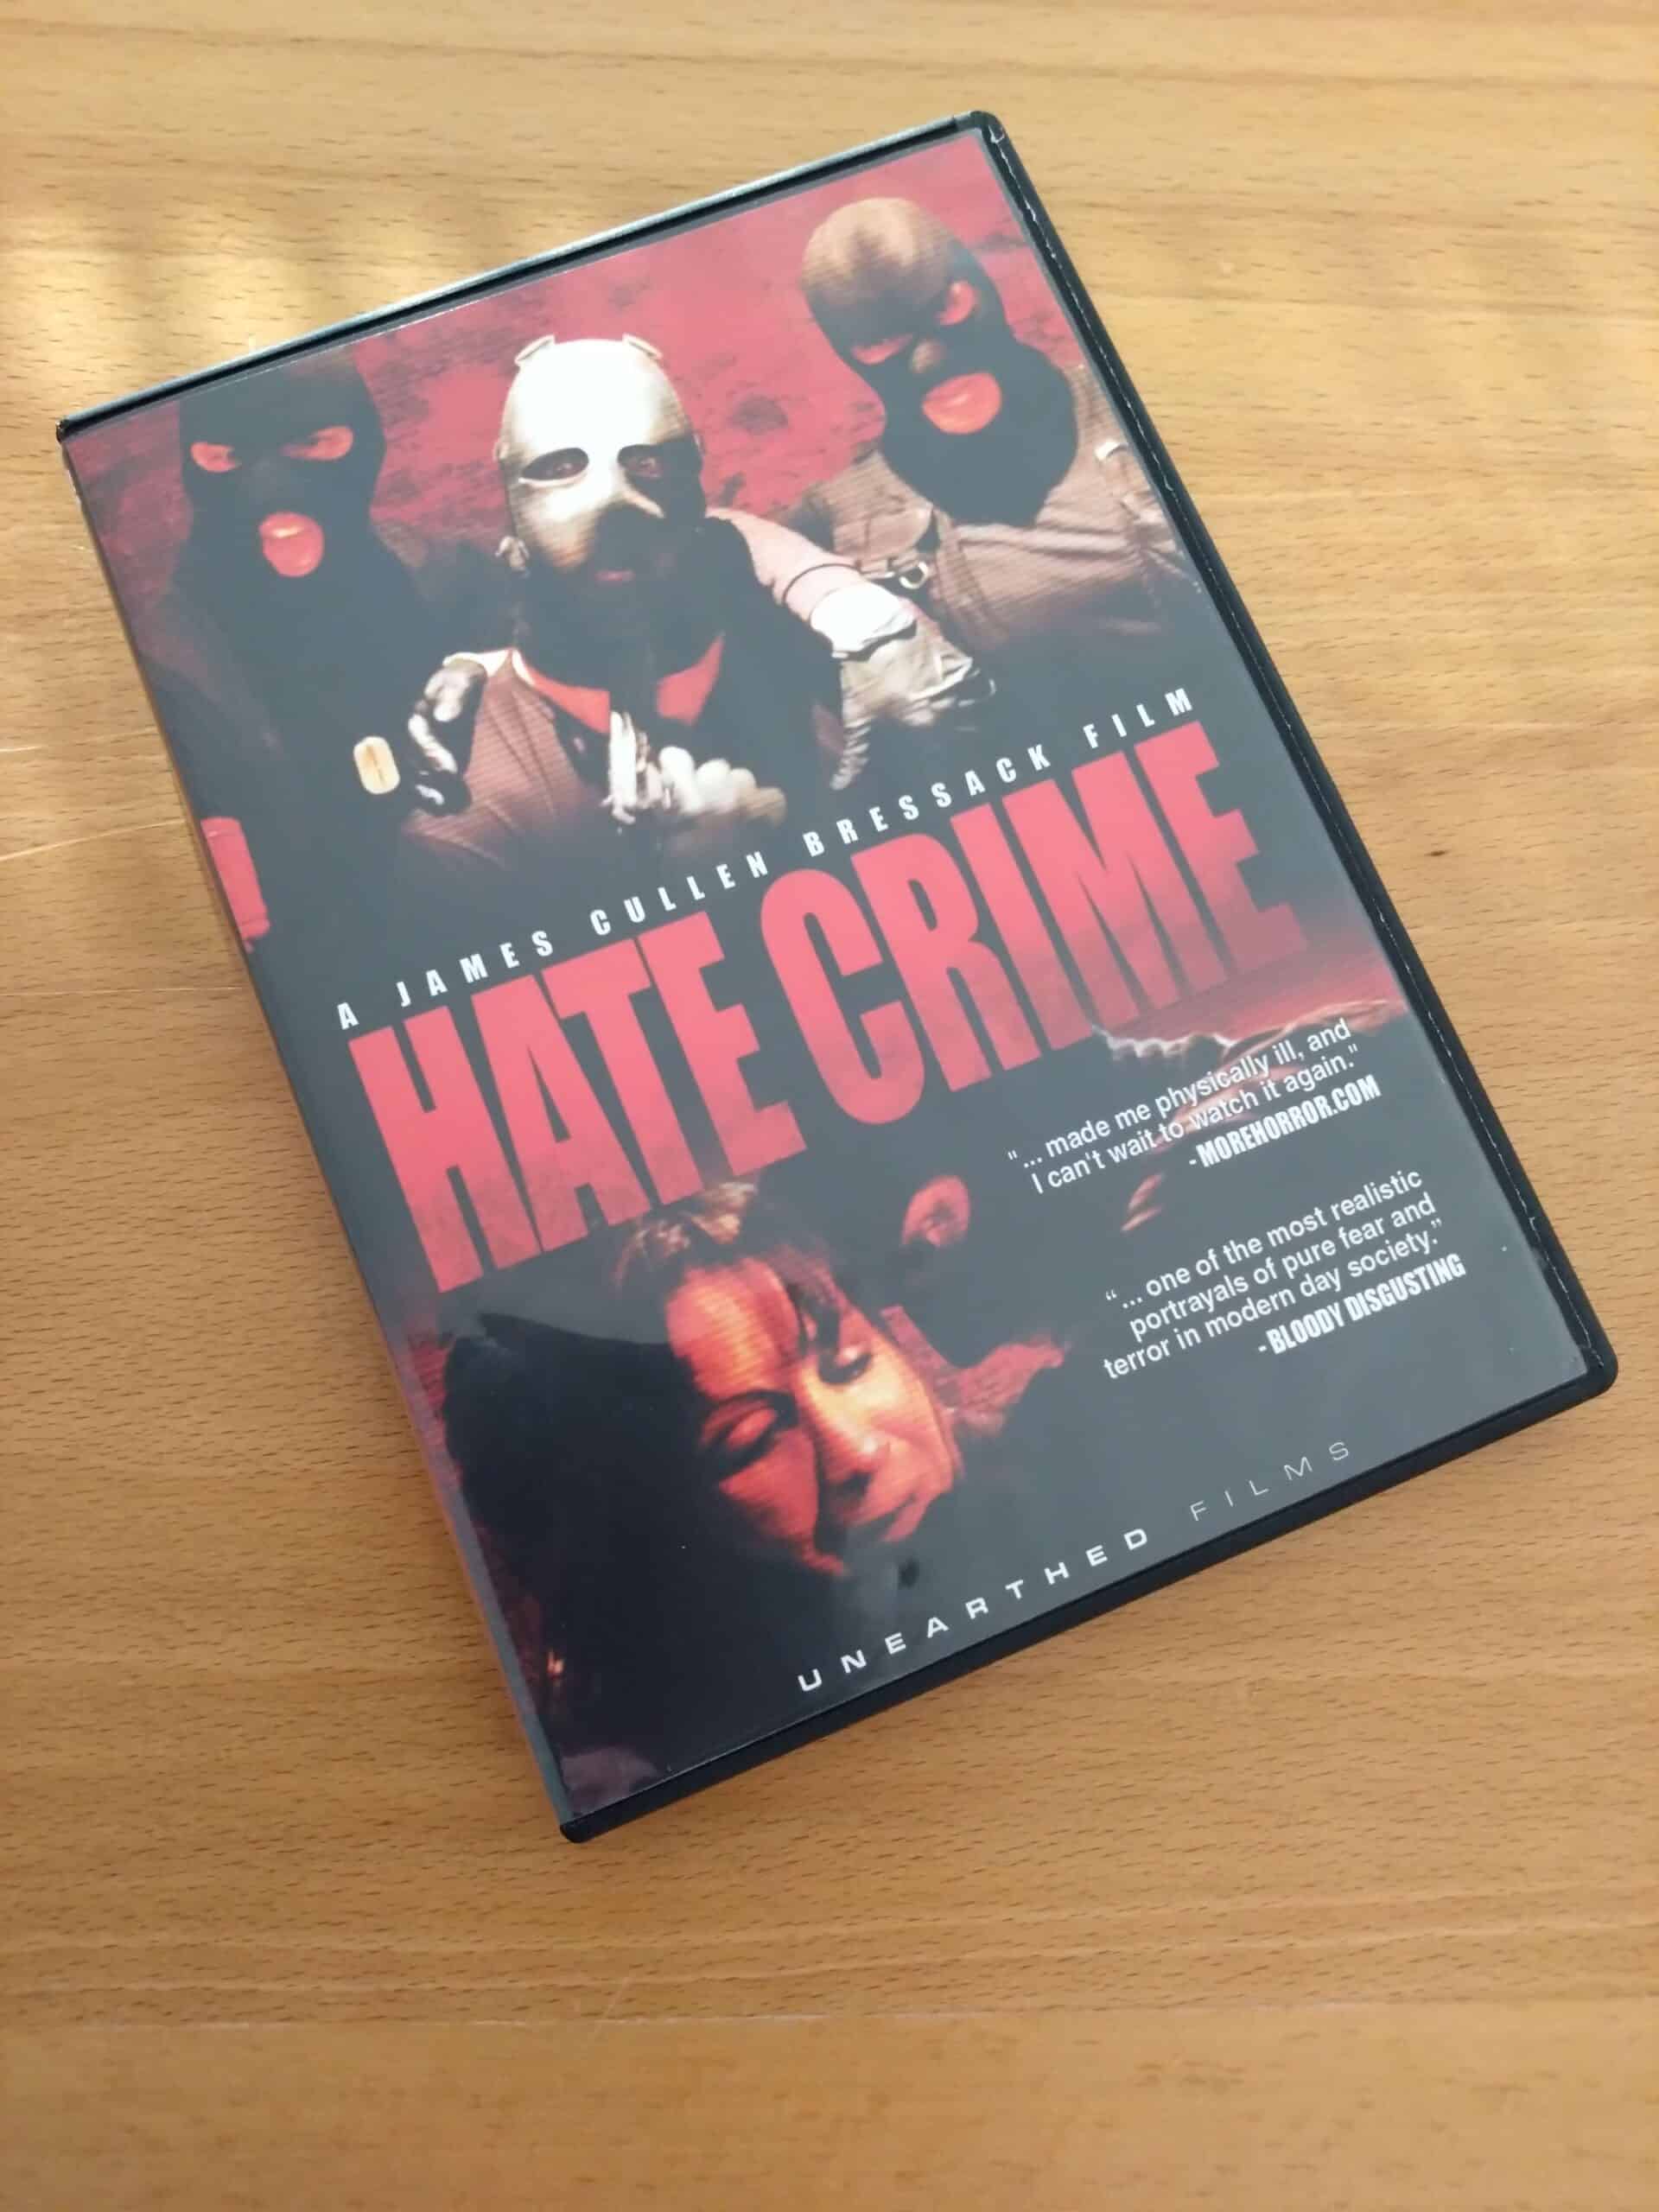 [Review] Hate Crime DVD Amaray